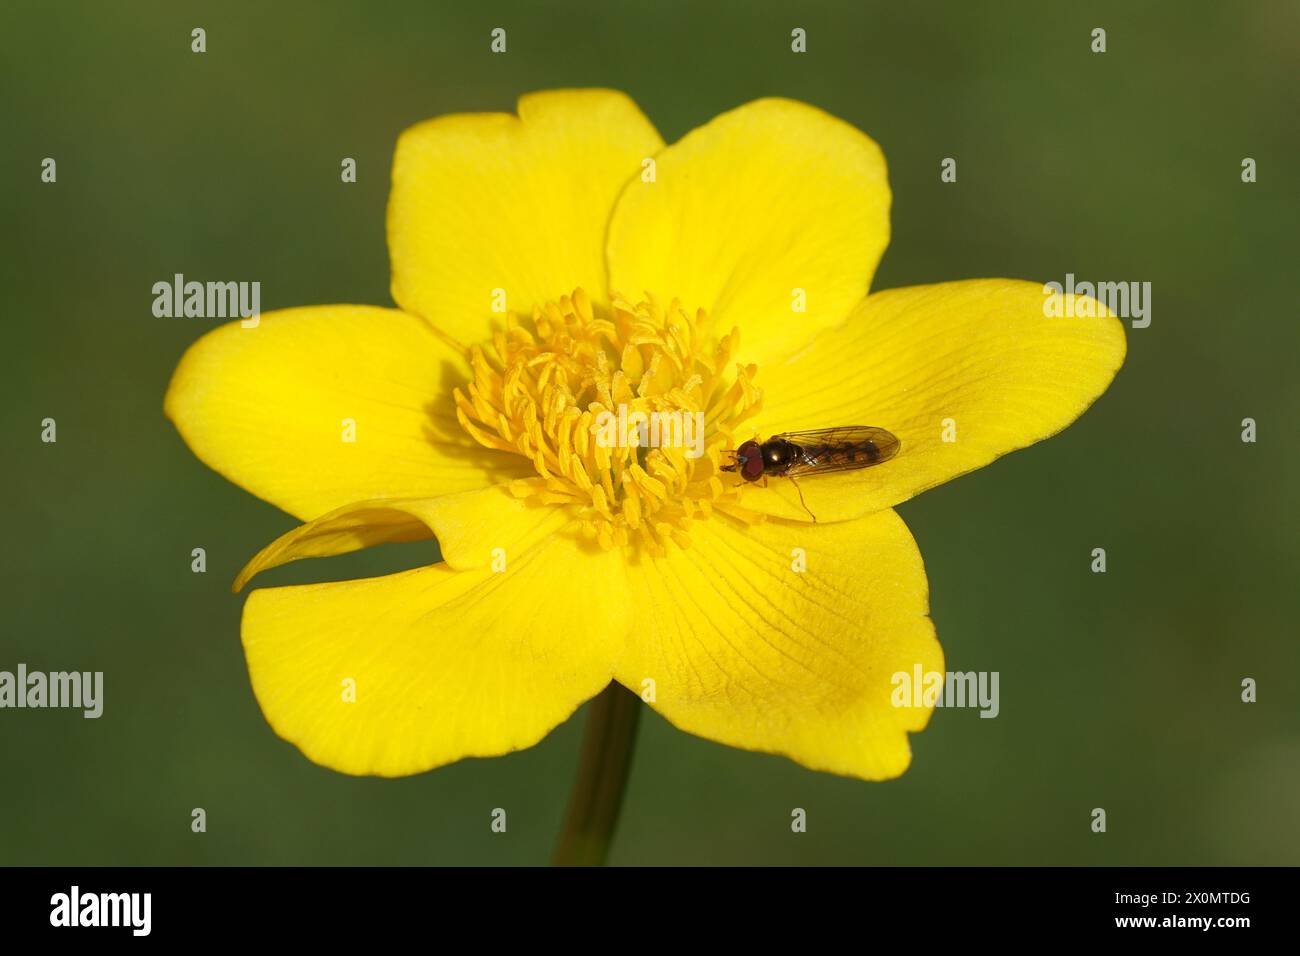 Male hoverfly Melanostoma scalare, family Syrphidae on a yellow flower of marsh-marigold or kingcup (Caltha palustris), buttercup family Ranunculaceae Stock Photo